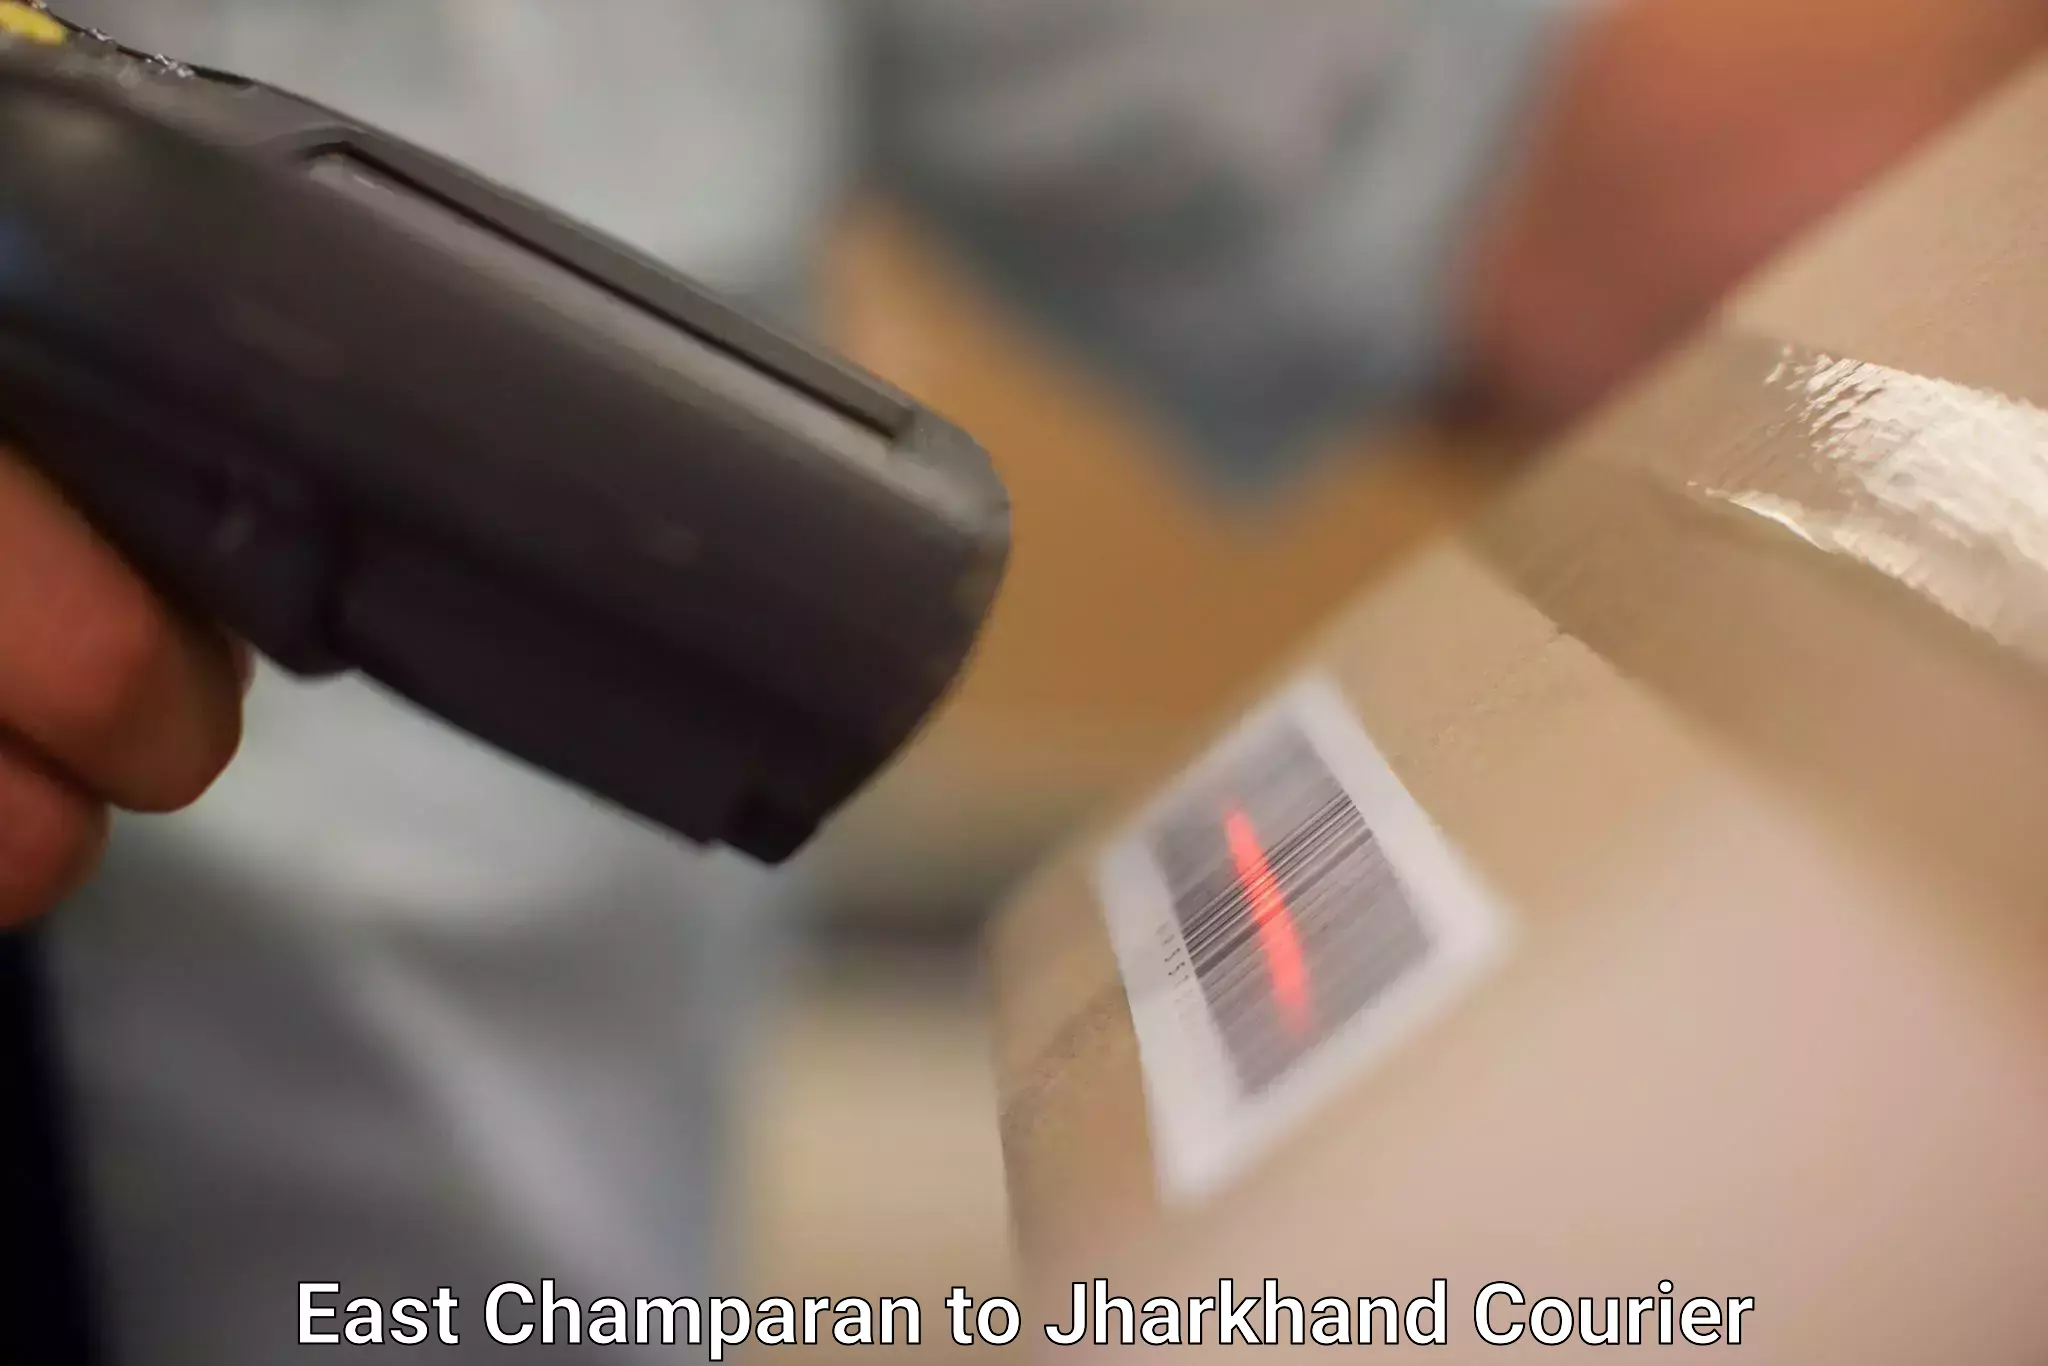 High-capacity parcel service East Champaran to Hazaribagh